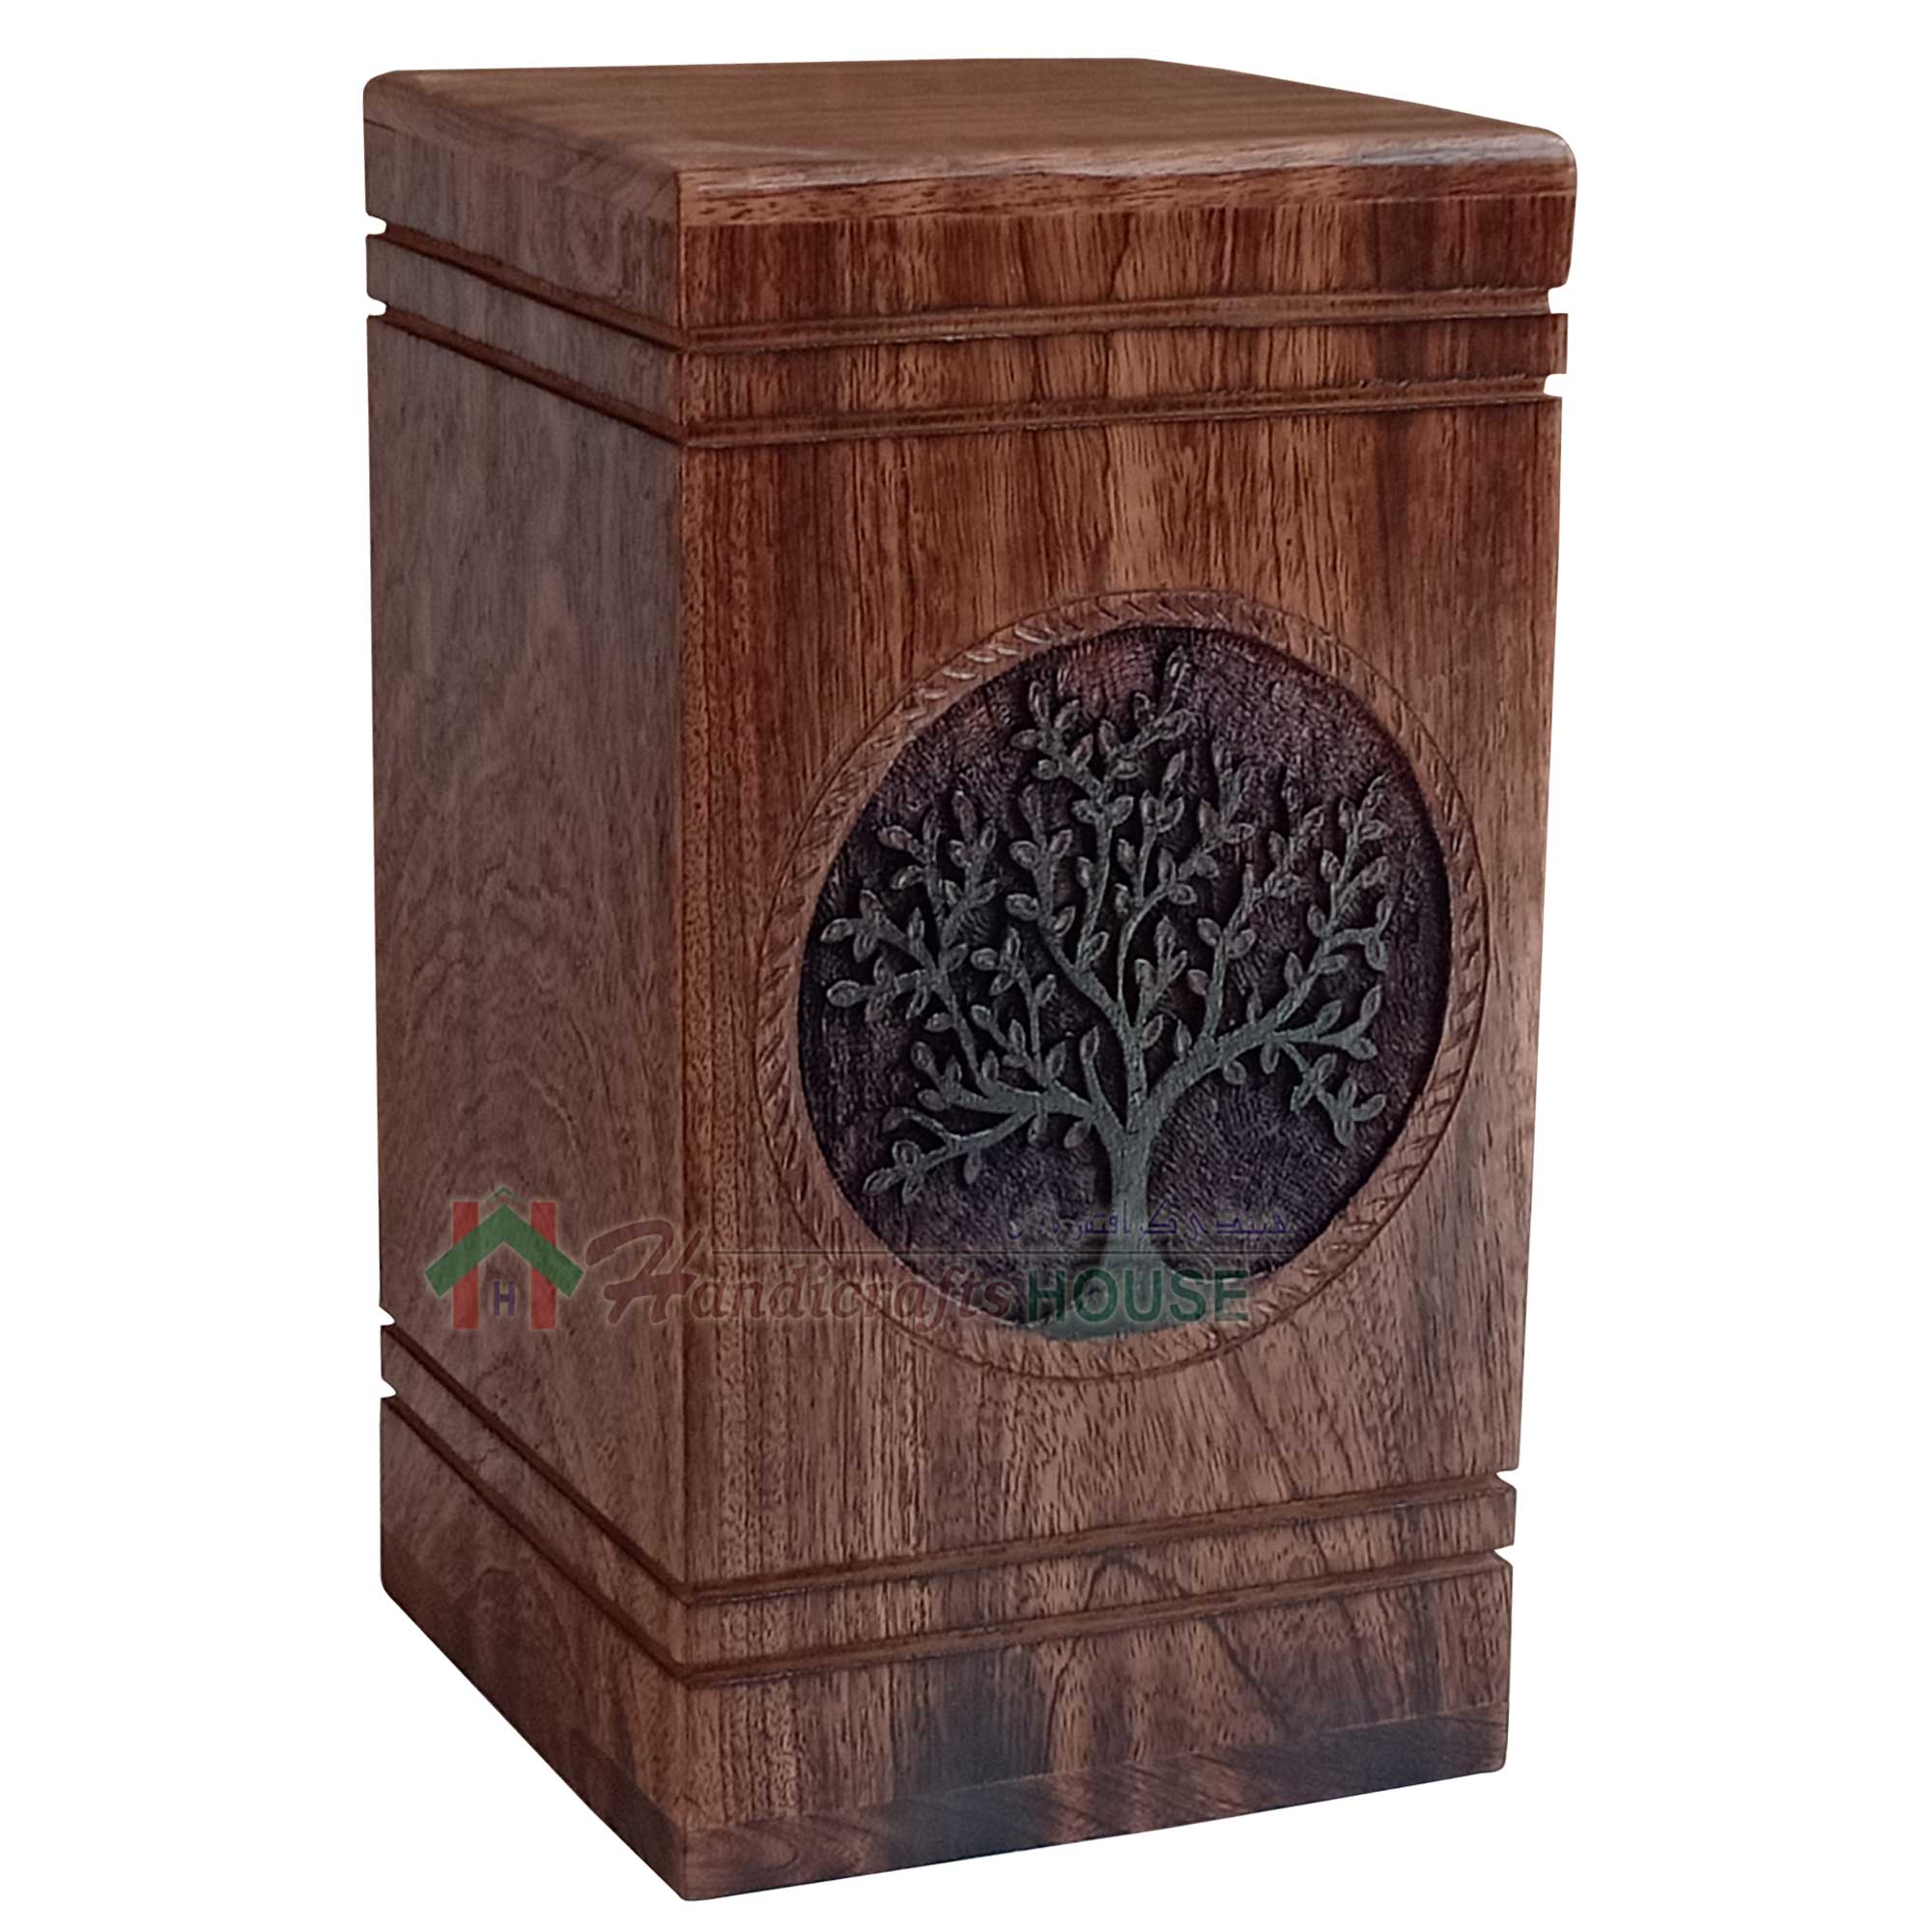 Set of 4 Dark Brown Sheesham Wood Pet Urns for Ashes Tree of Life Engraved Wooden Cremation Urns for Ashes Funeral Urns for Human Ashes Adult Pet Urns for Dogs,Wooden Box